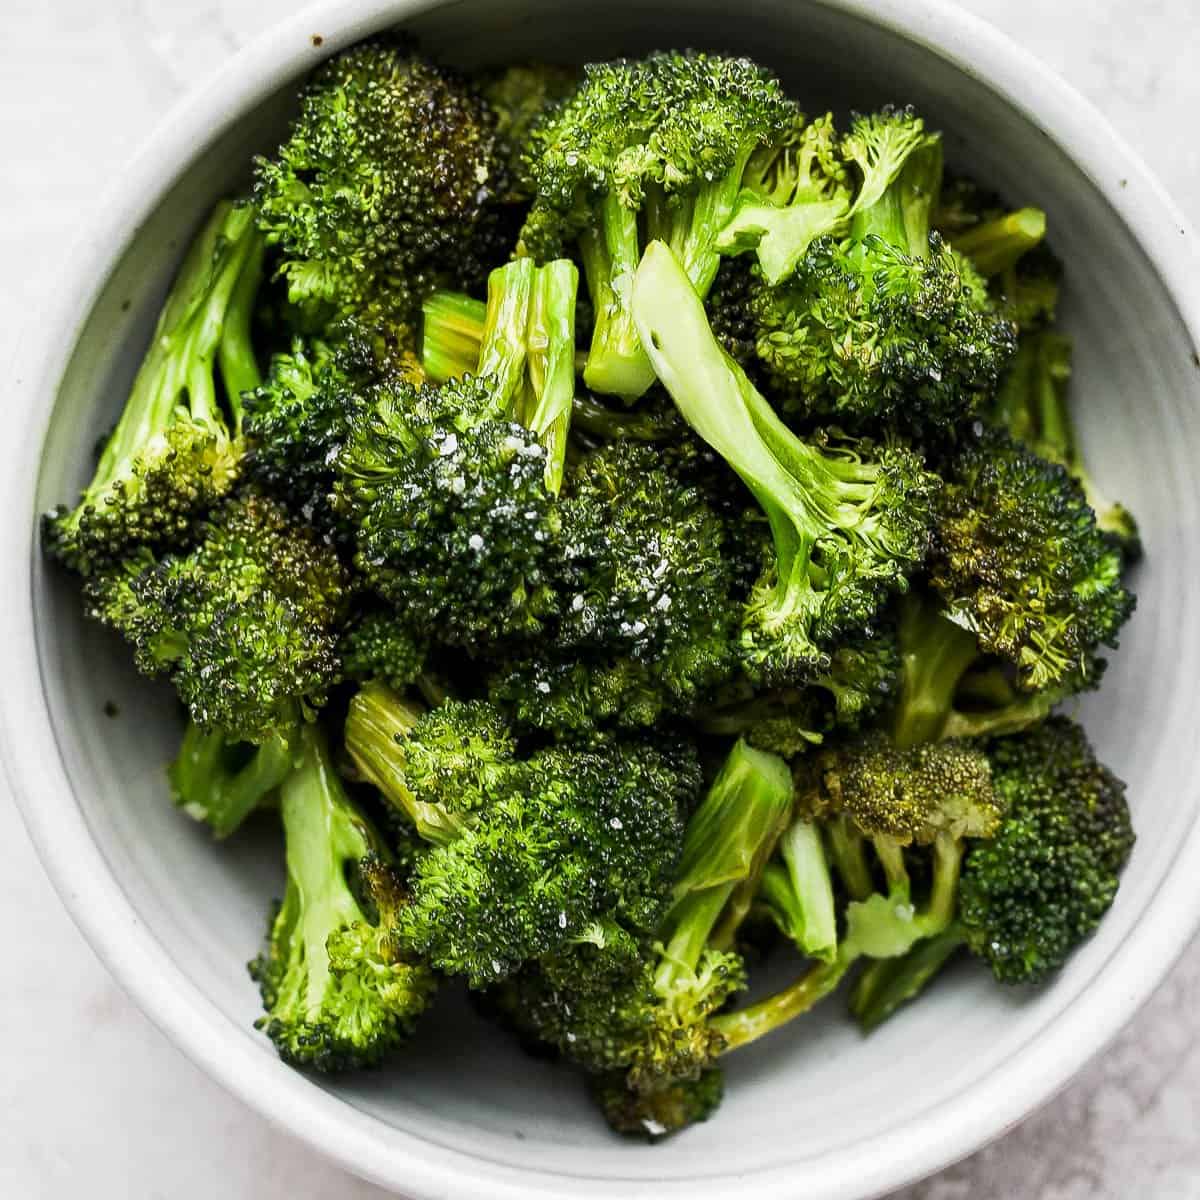 Smoked Broccoli - The Wooden Skillet